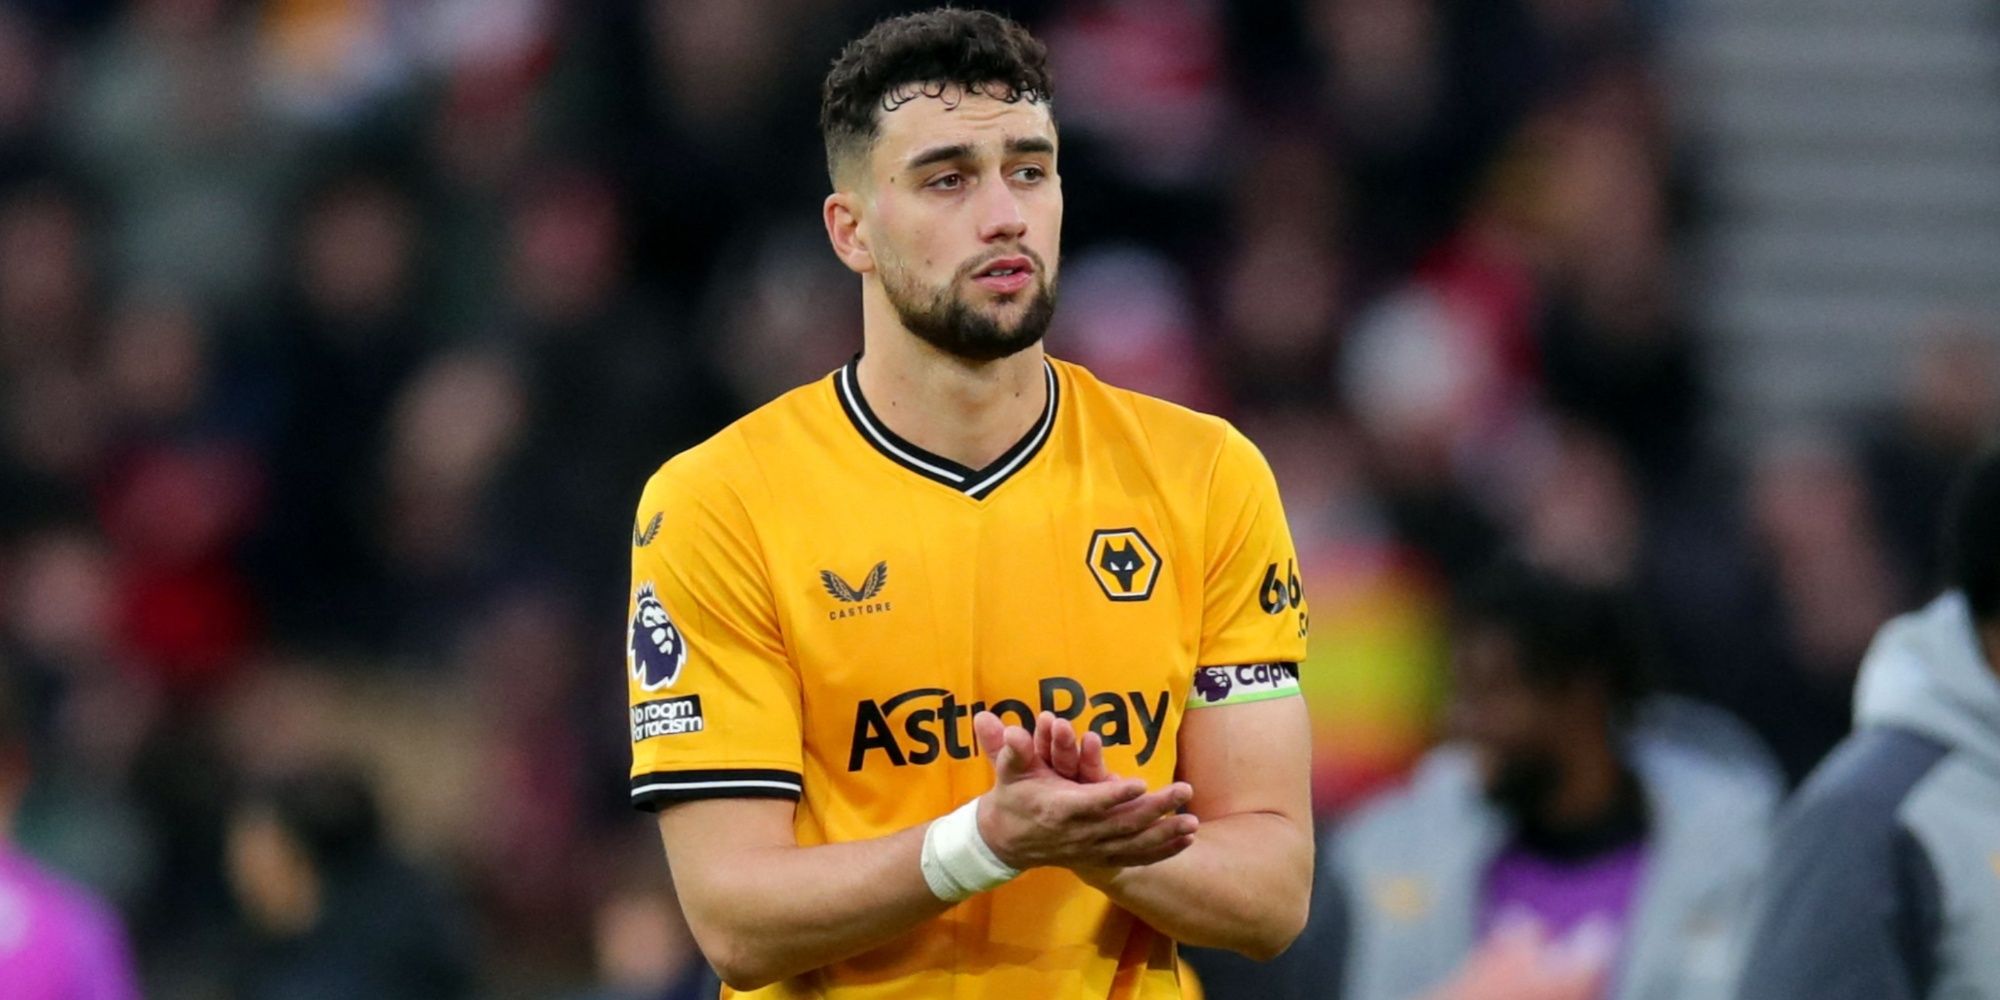 Man Utd 'Looking at' Deal to Sign Max Kilman From Wolves